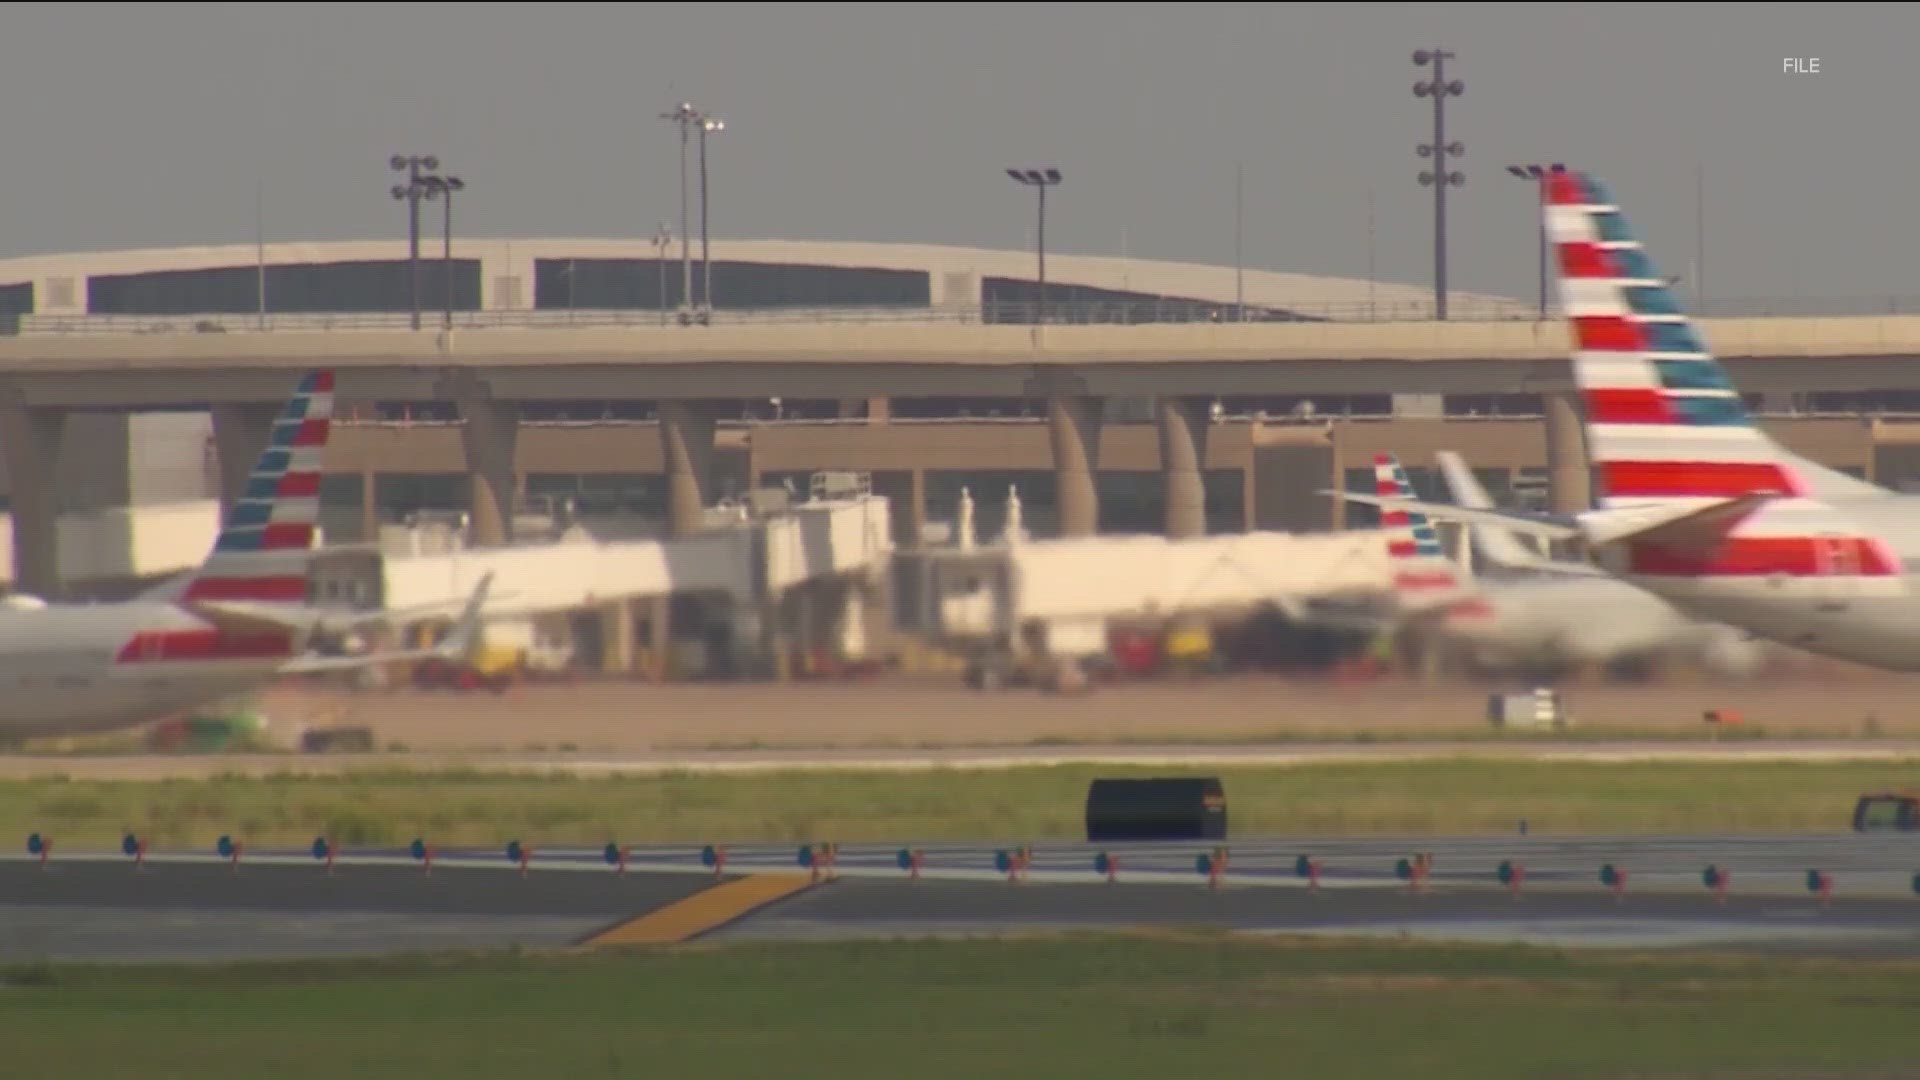 After multiple close calls and tragedies on the tarmac, Austin airport officials are creating a new Ramp Control Program to increase safety.